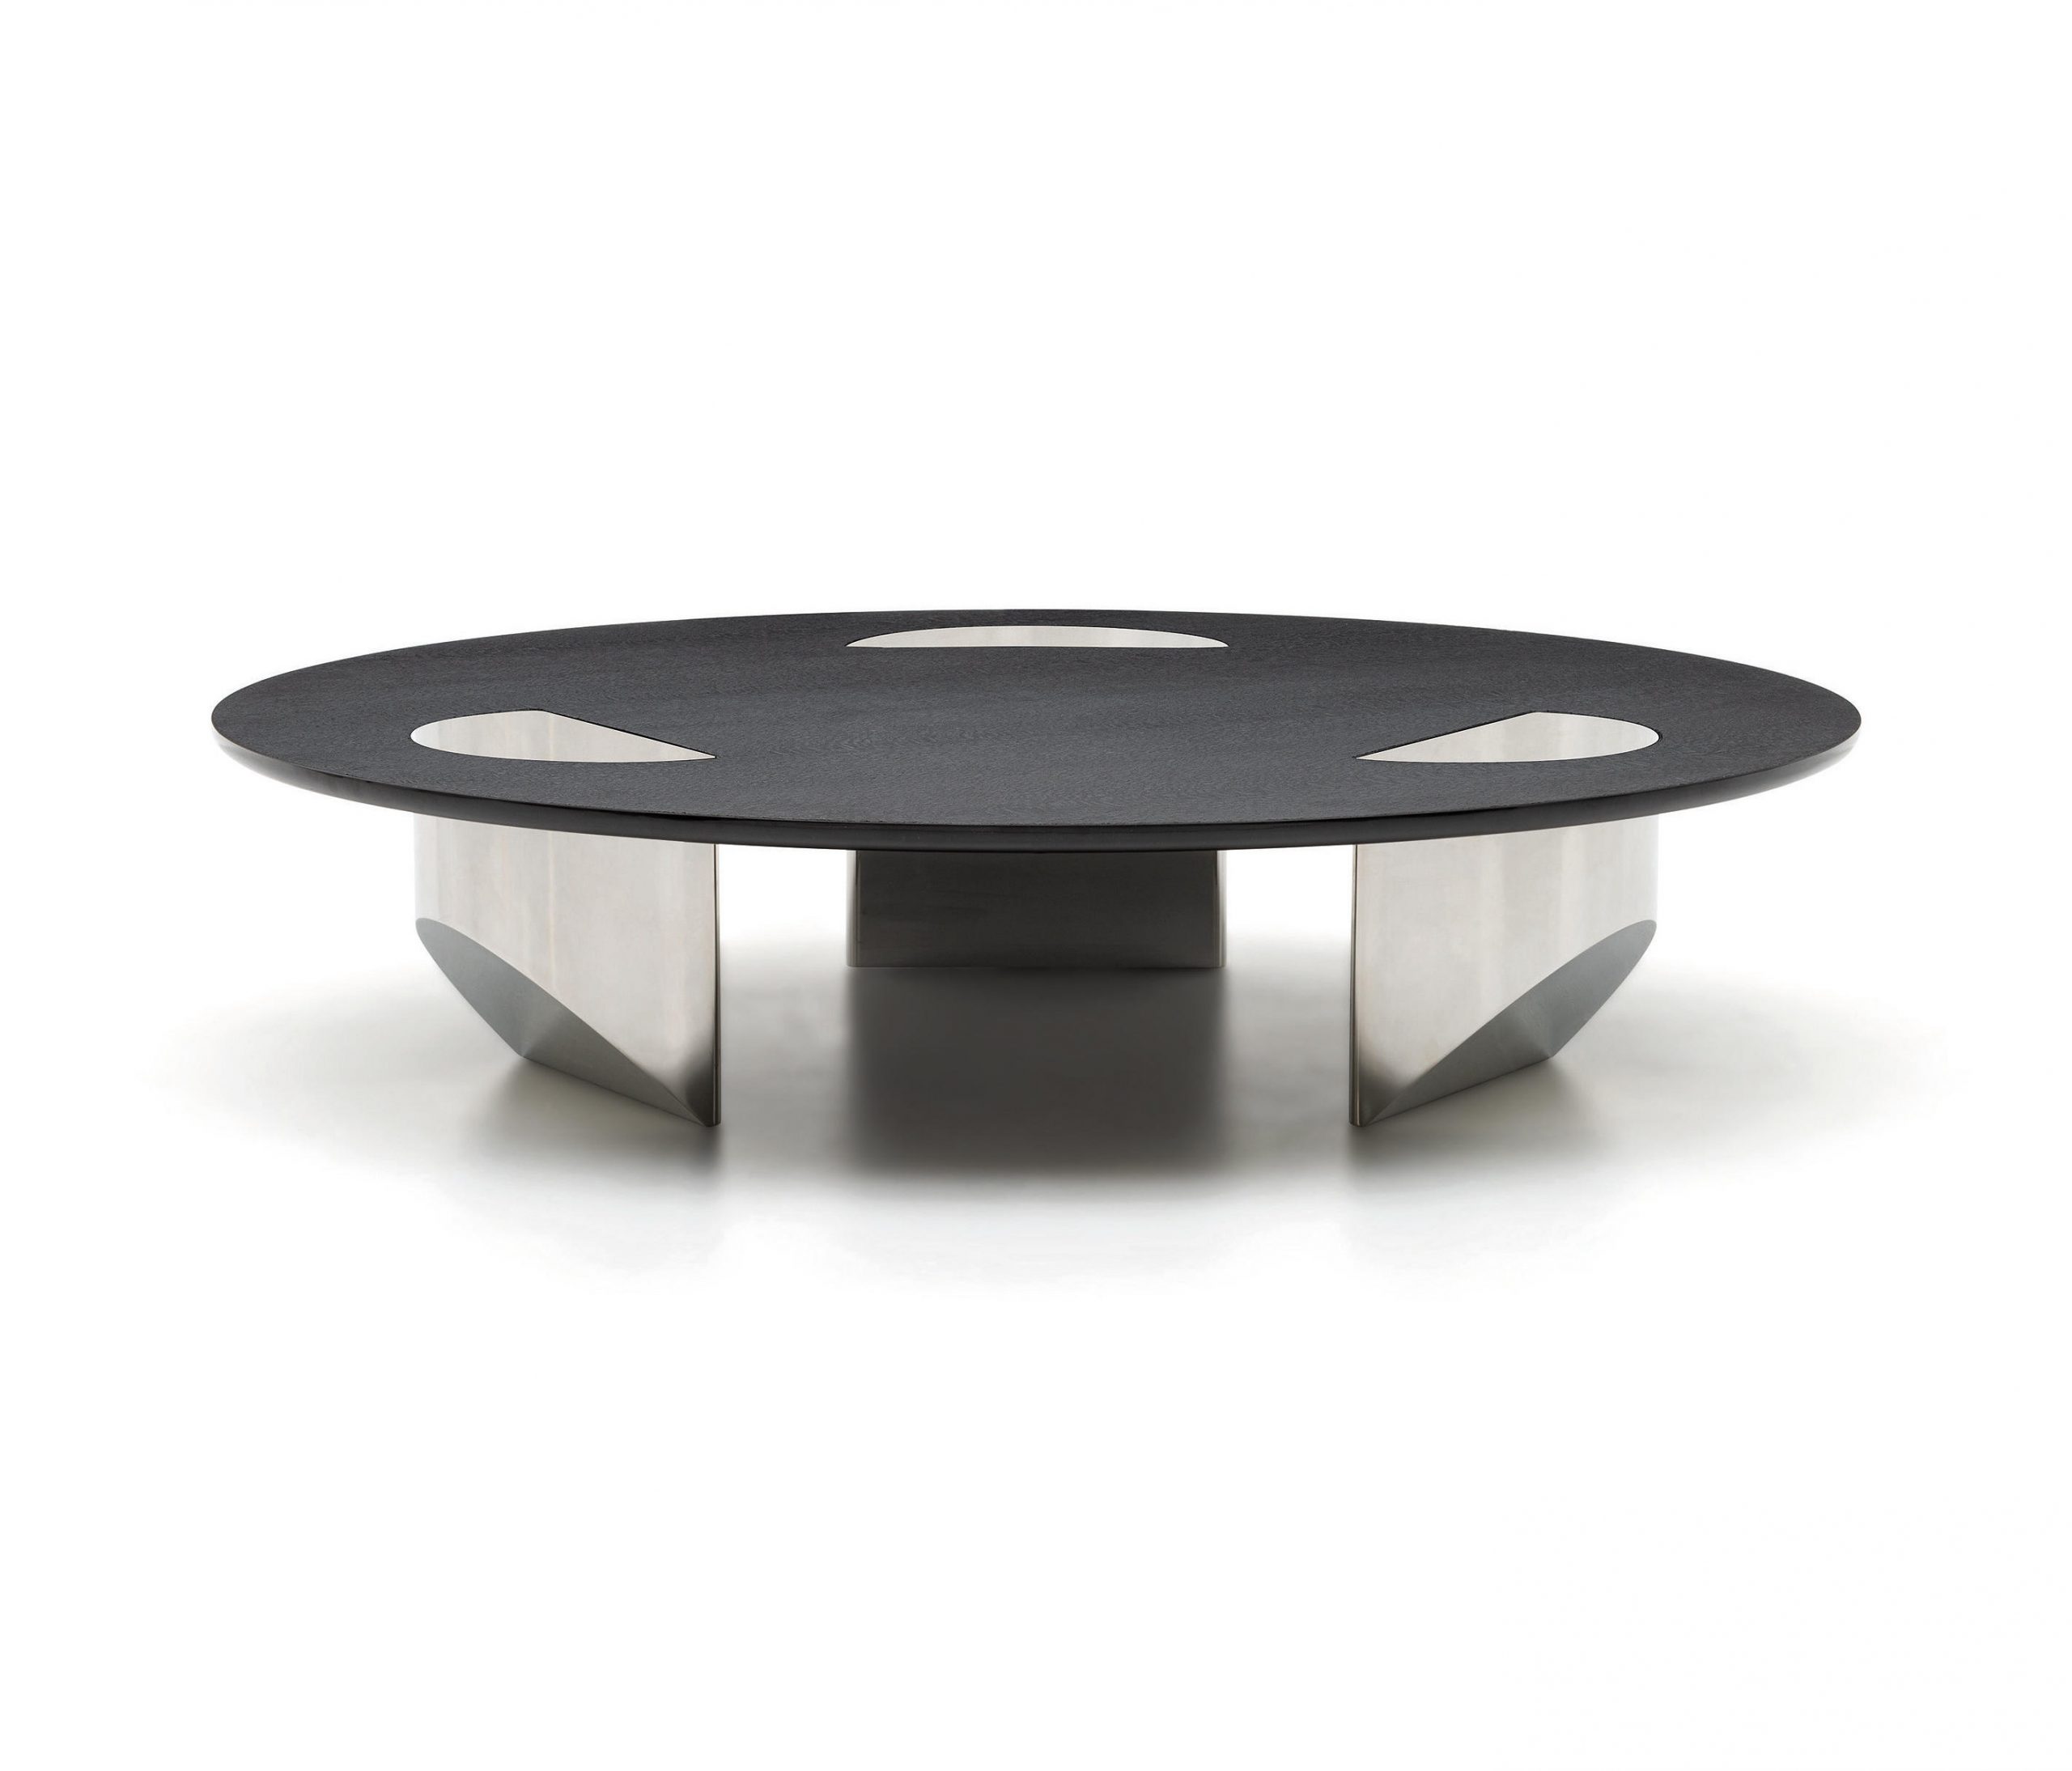 Wedge Coffee Table 05 Pro B Arcit18 Scaled 